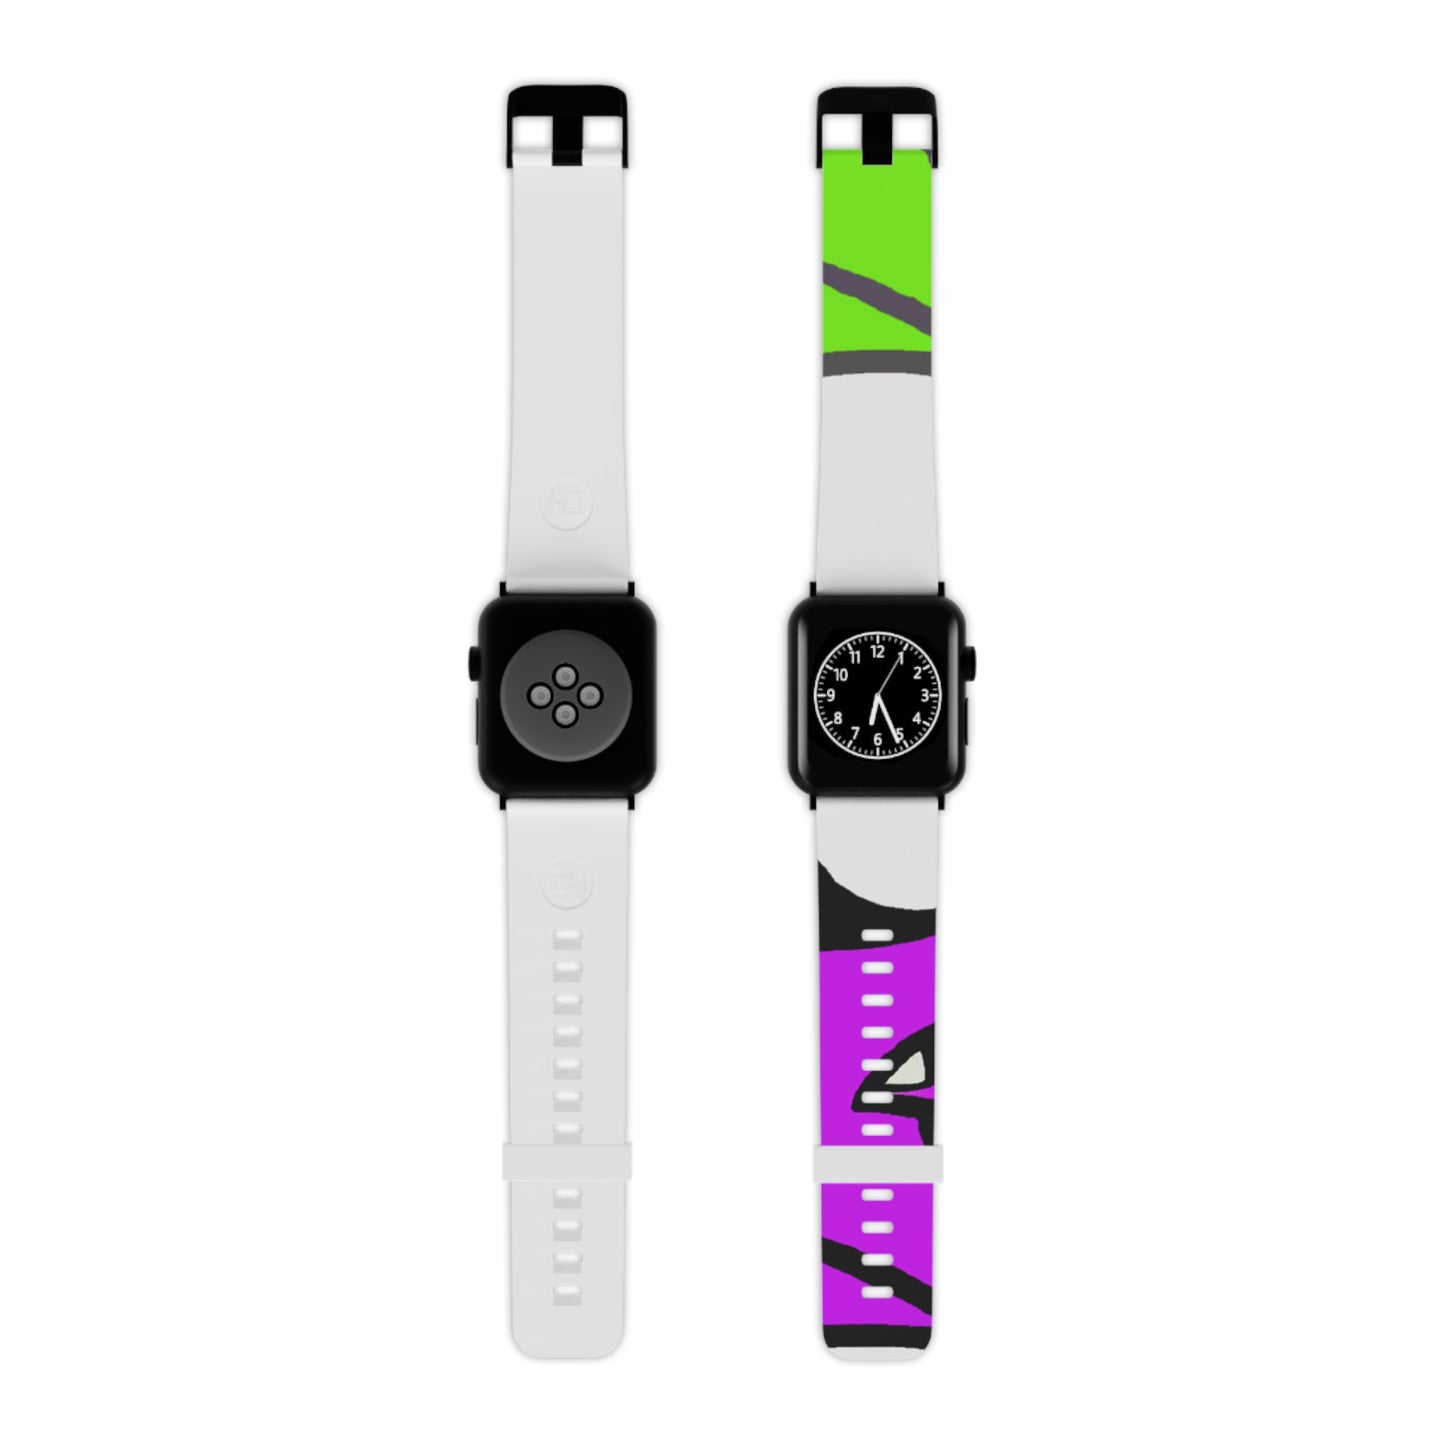 Empire State of Mind 202373 - Watch Band